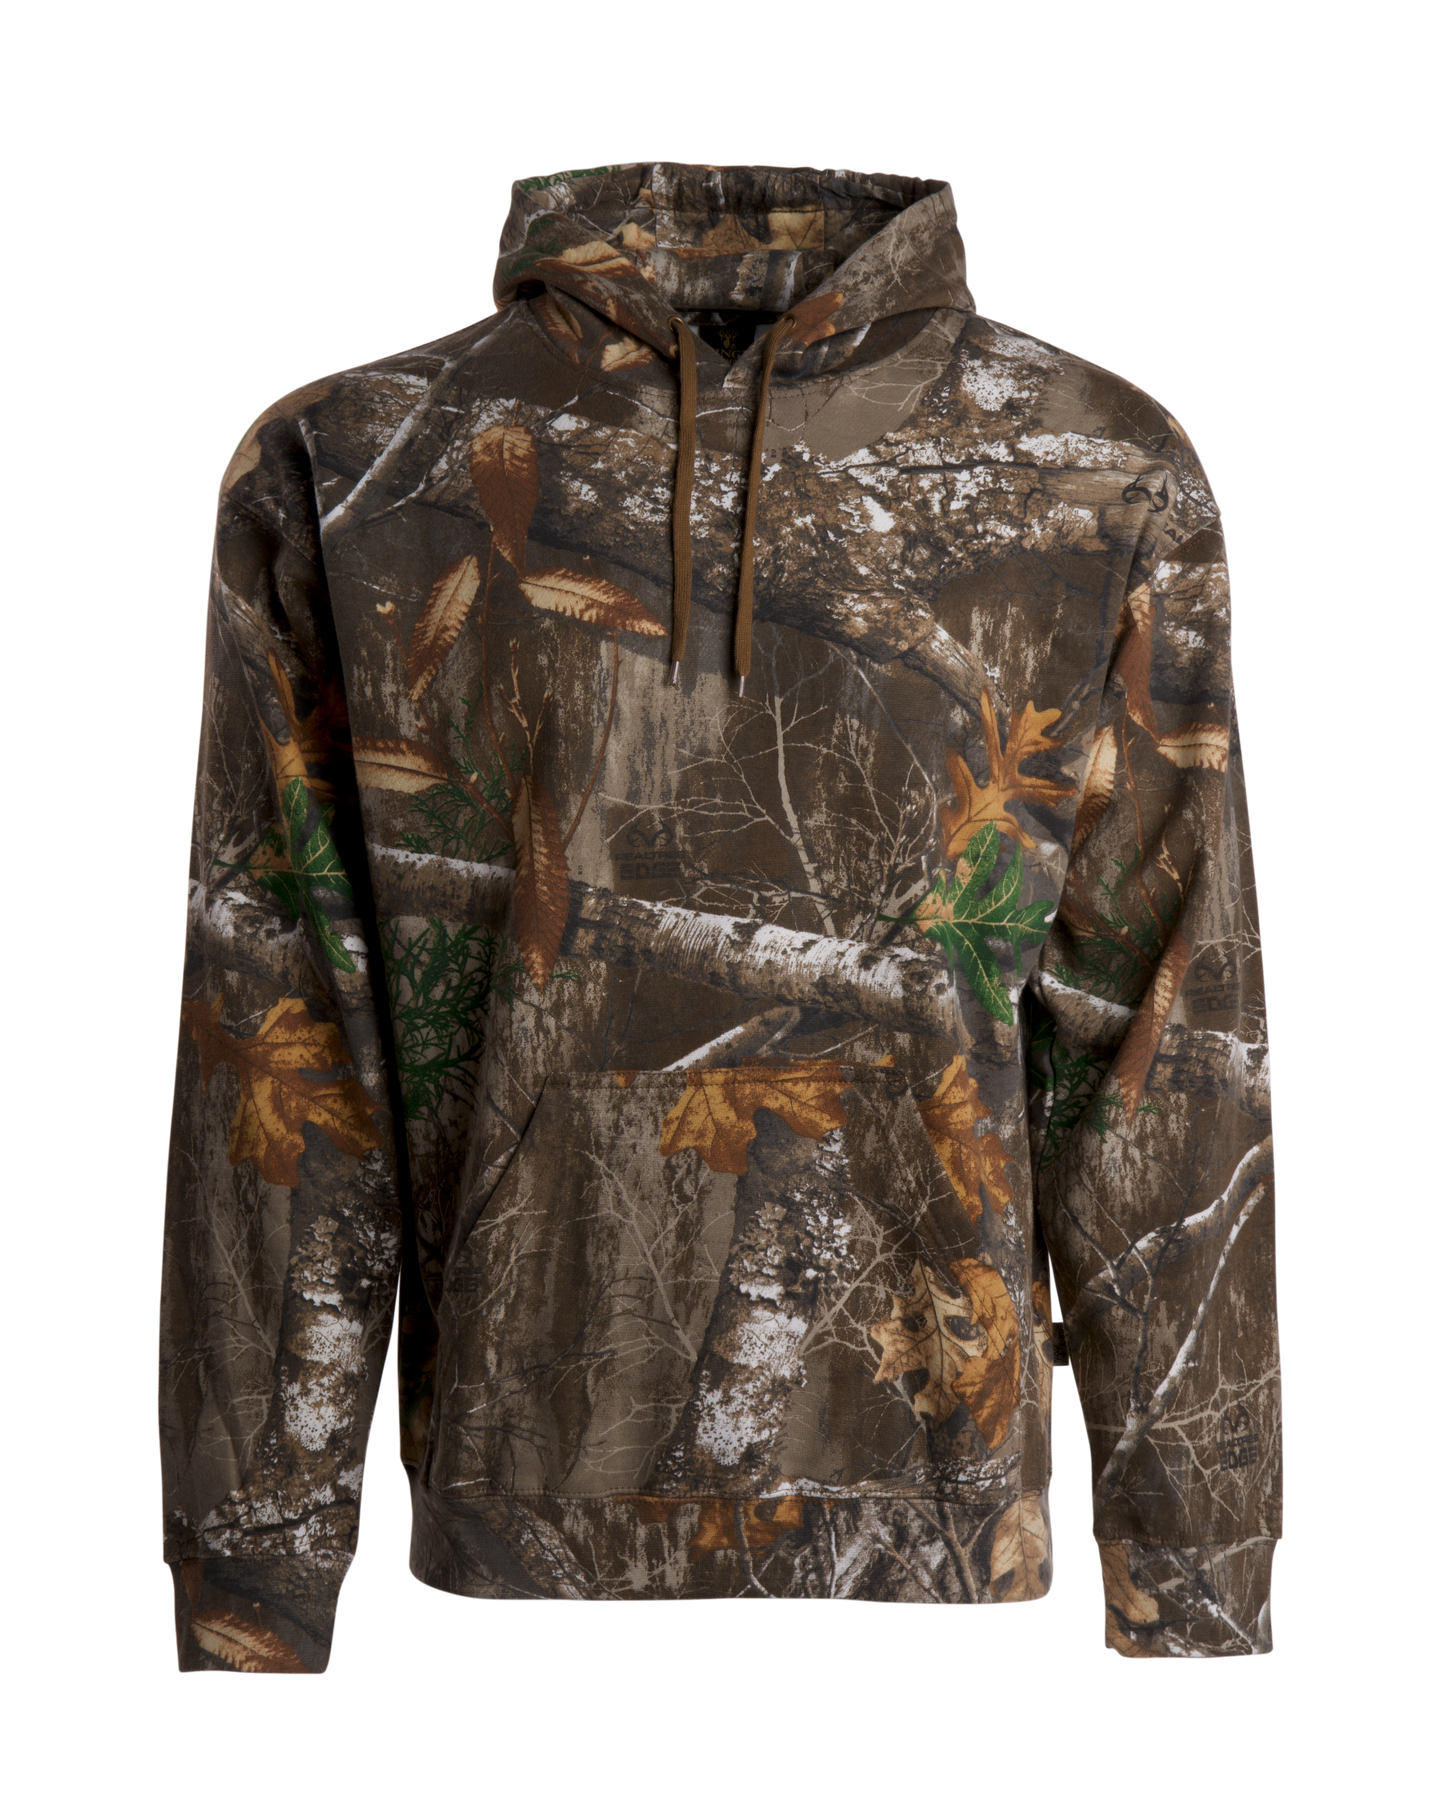 King's Camo Classic Cotton Pullover Hoodie Realtree Edge